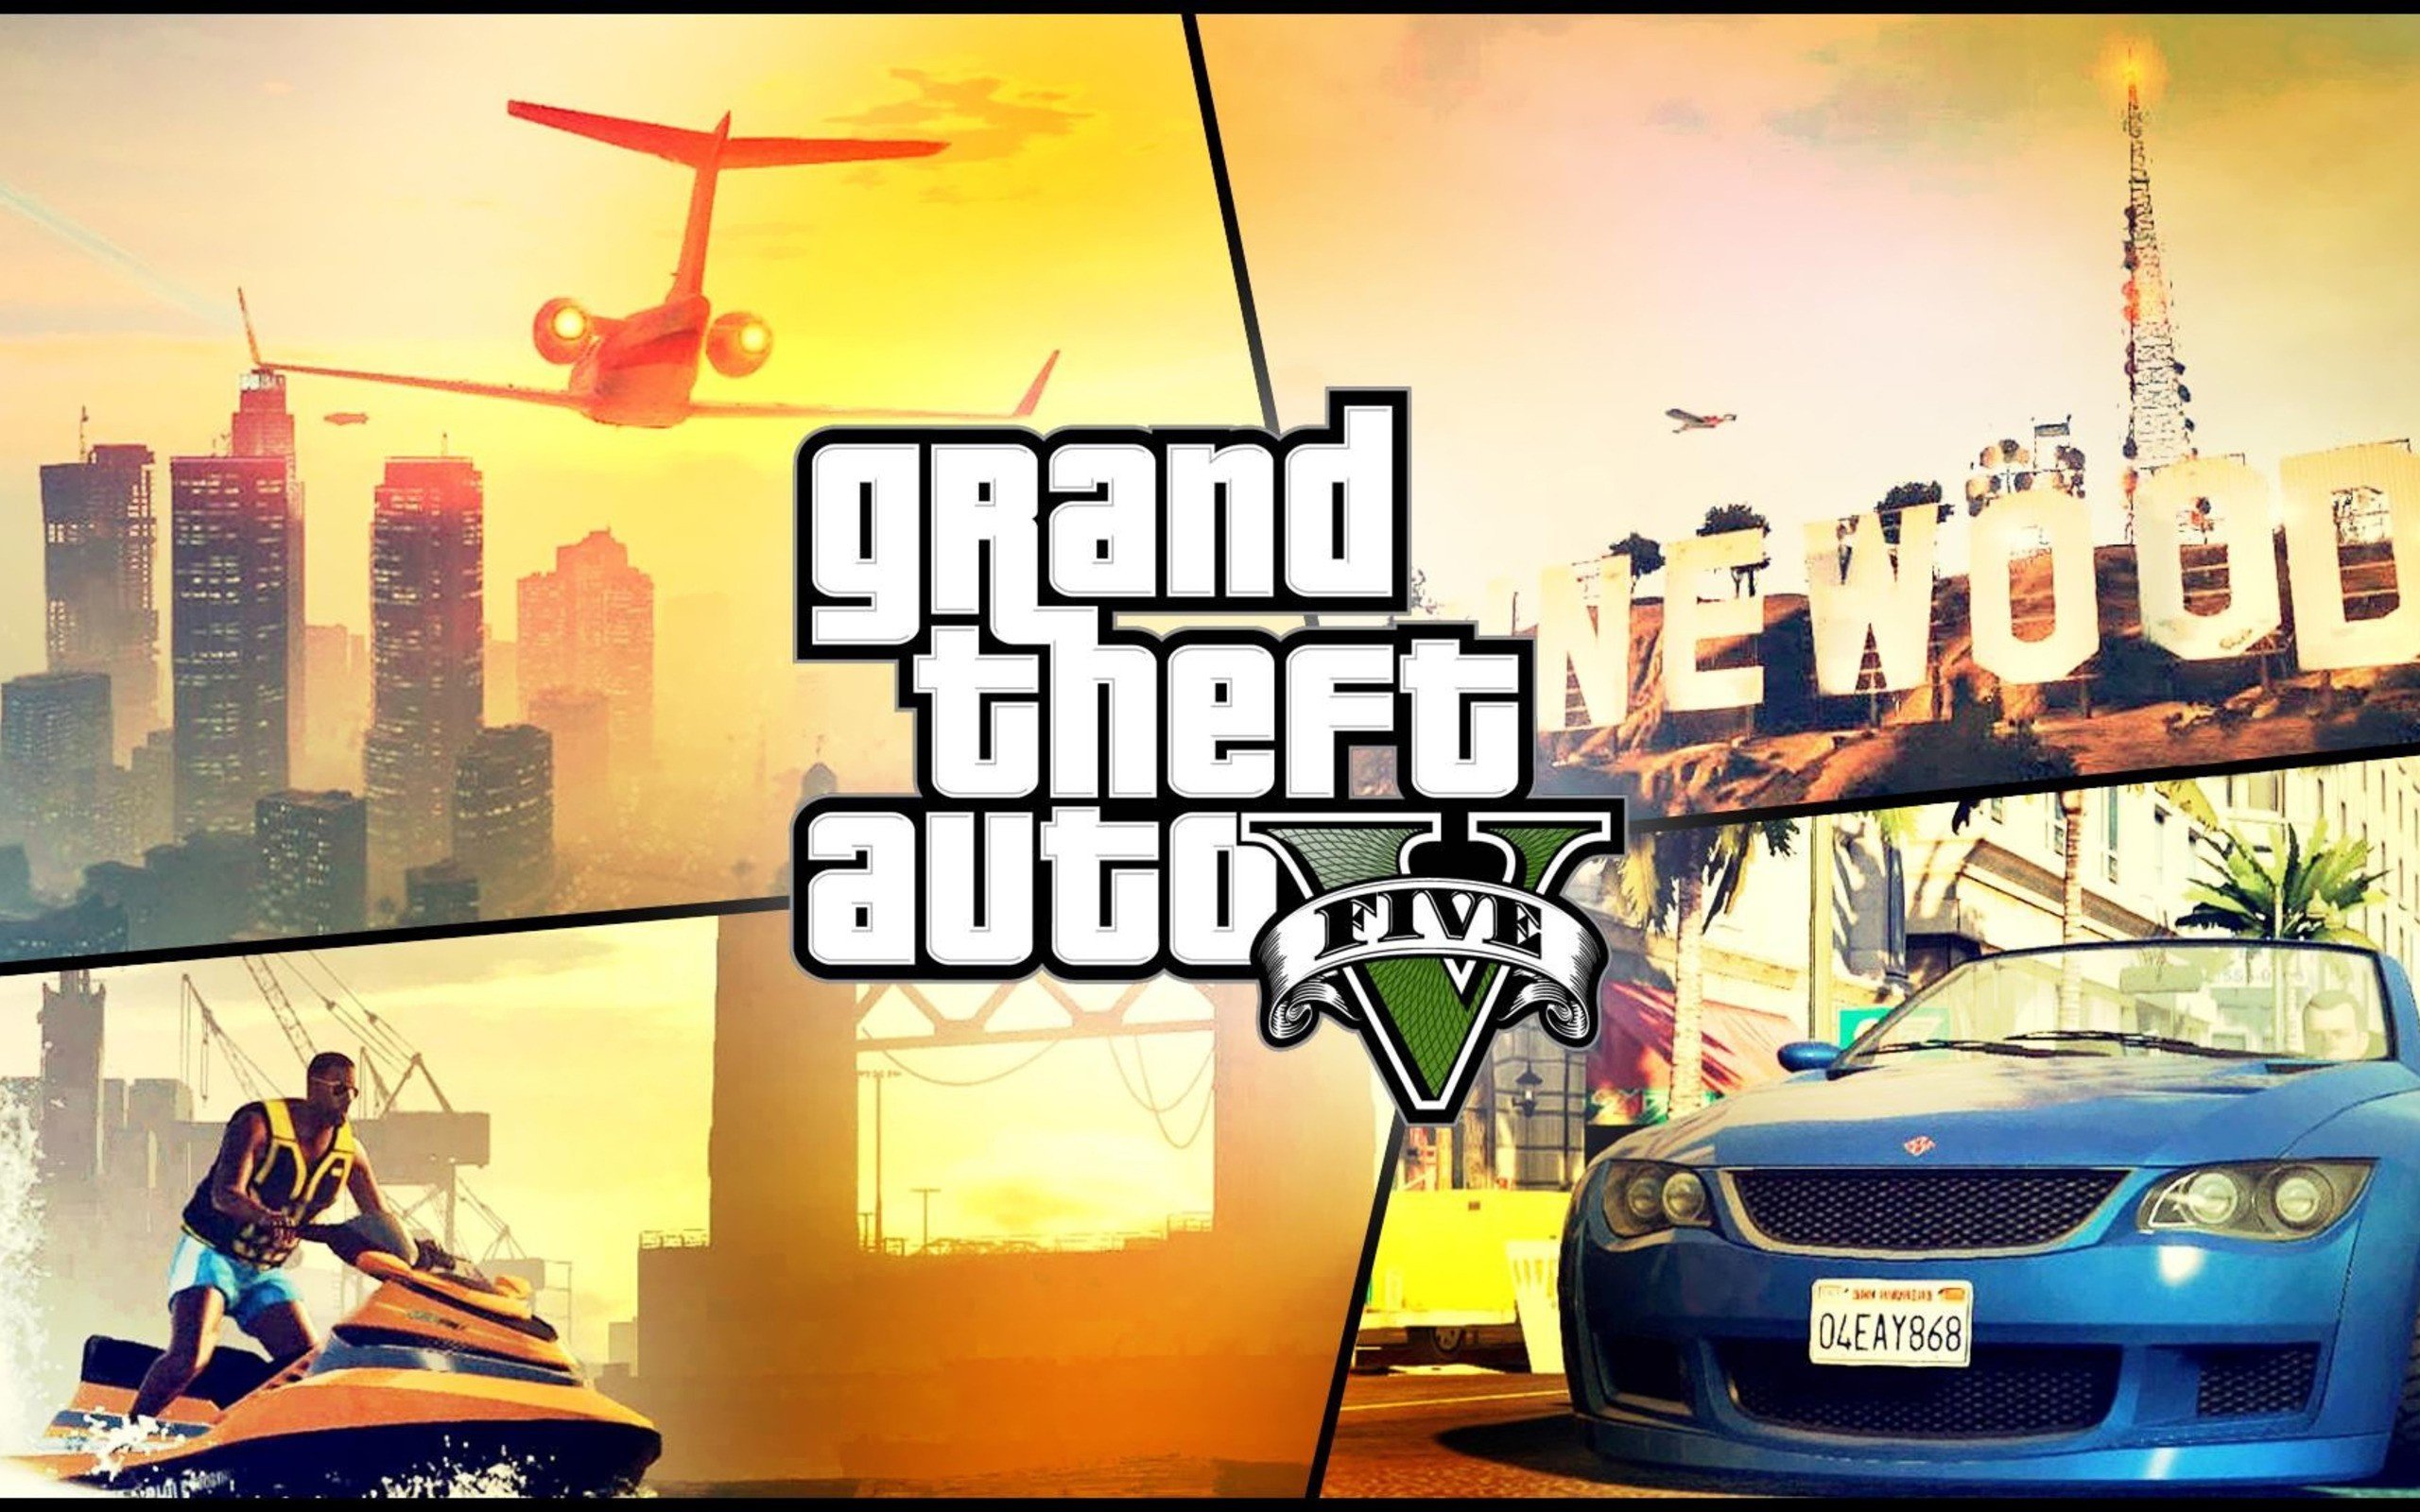 grand, Theft, Auto, V, Grand, Theft, Auto Wallpapers HD / Desktop and